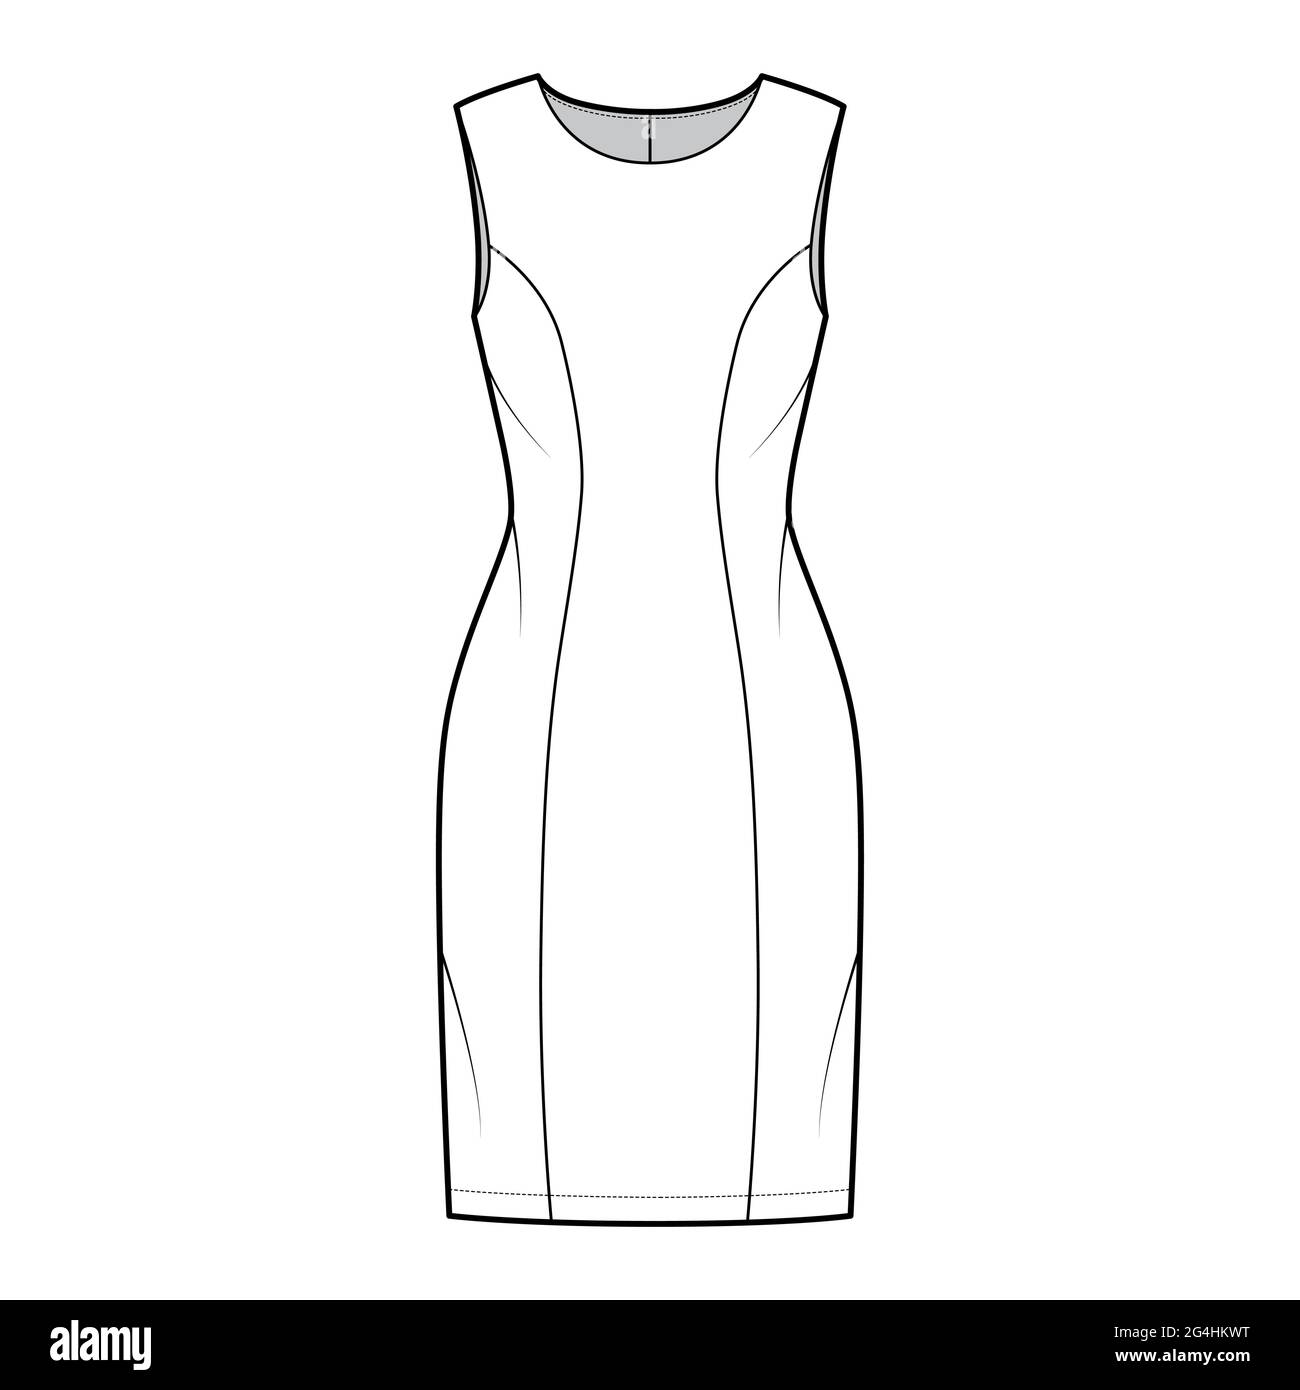 Dress princess line technical fashion illustration with sleeveless, fitted body, knee length pencil skirt. Flat apparel front, white color style. Wome Stock Vector